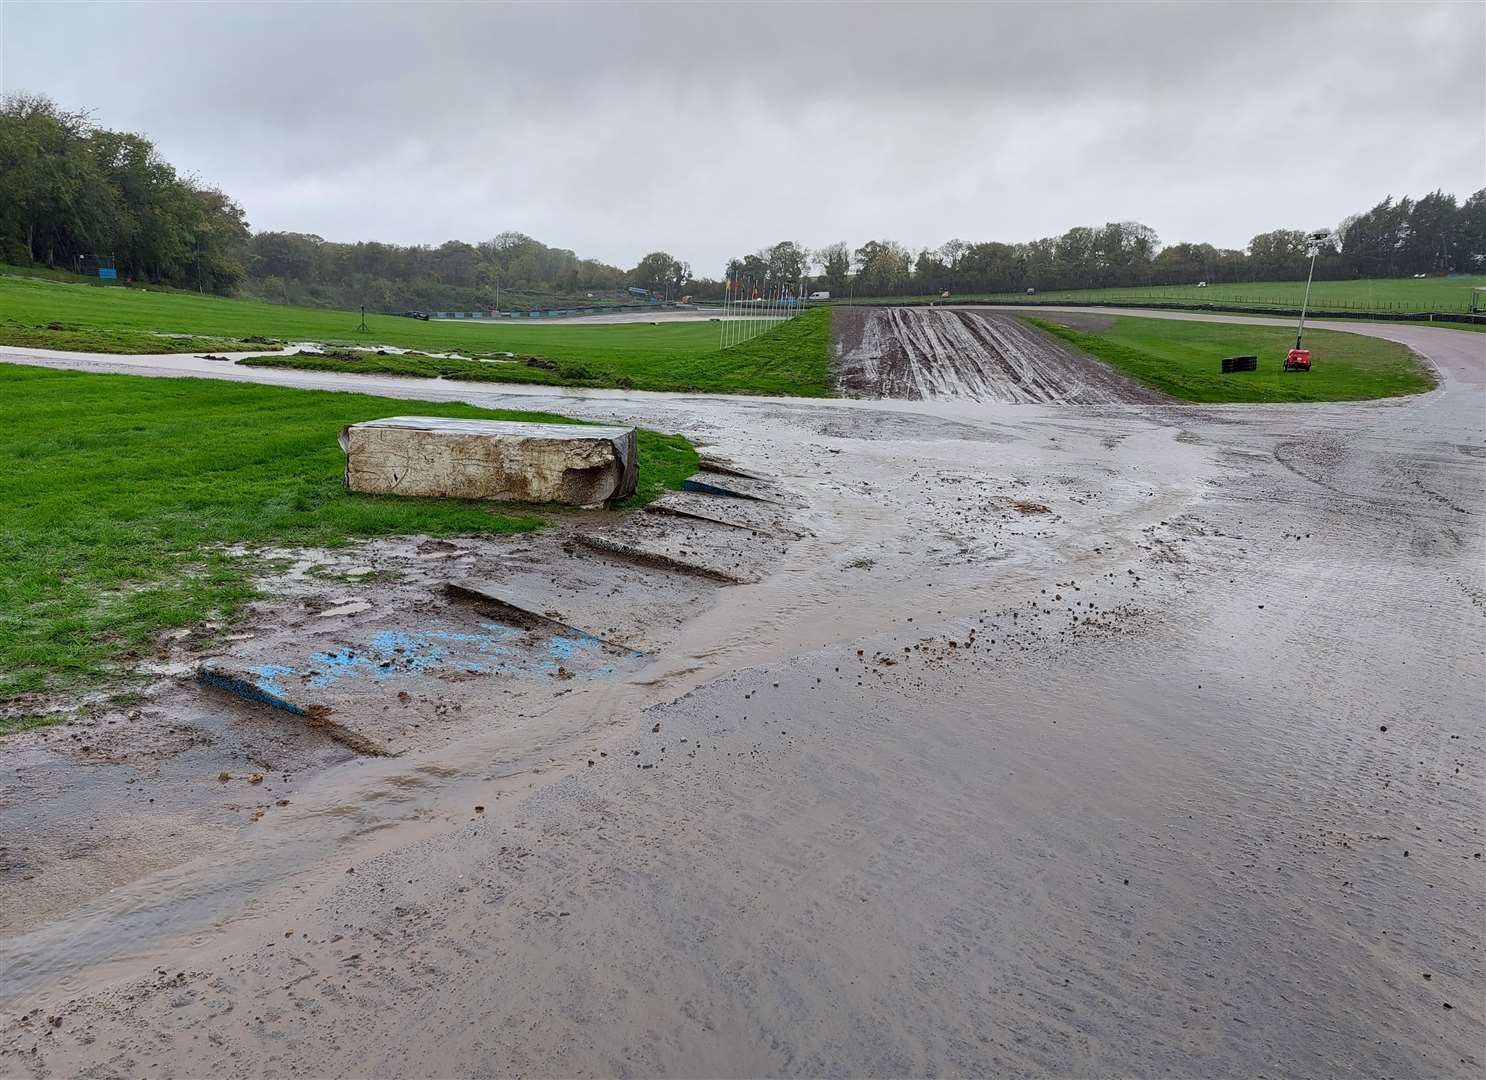 Parts of the circuit were flooded after "exceptional overnight rainfall"